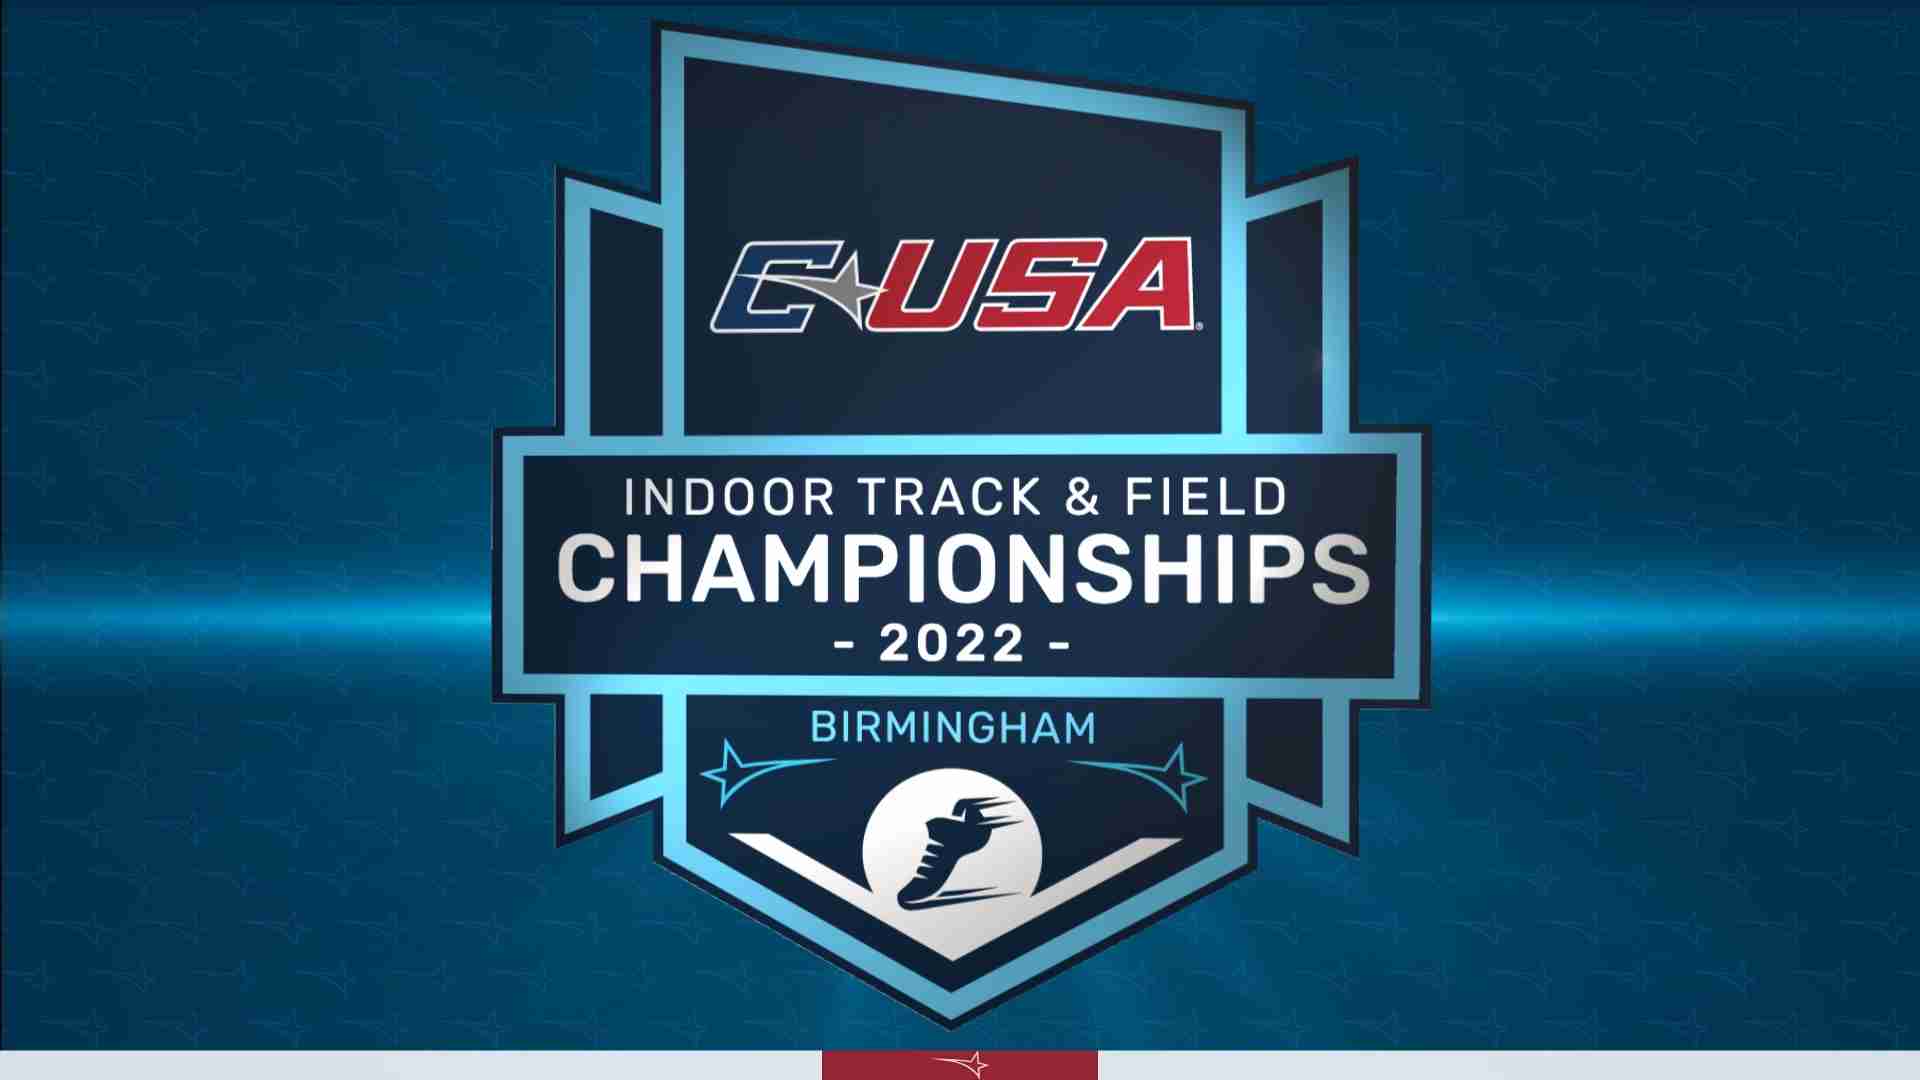 How to watch the 2022 Conference USA Indoor Track and Field Championships?